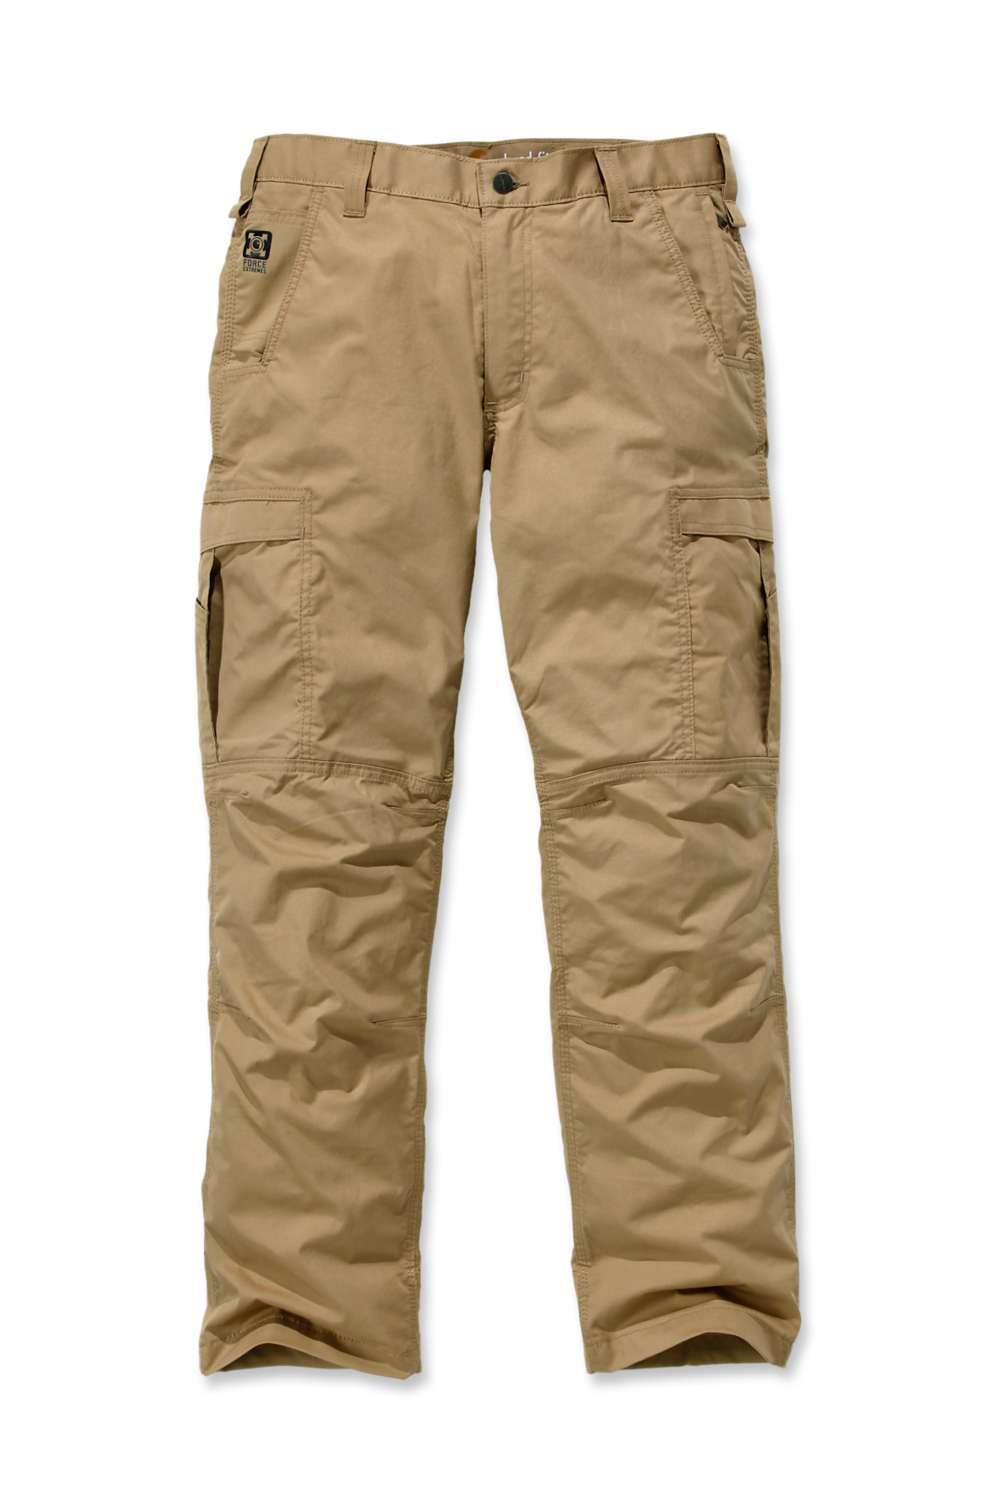 FORCE EXTREMES RUGGED Leichte Cargohose Relaxed Fit